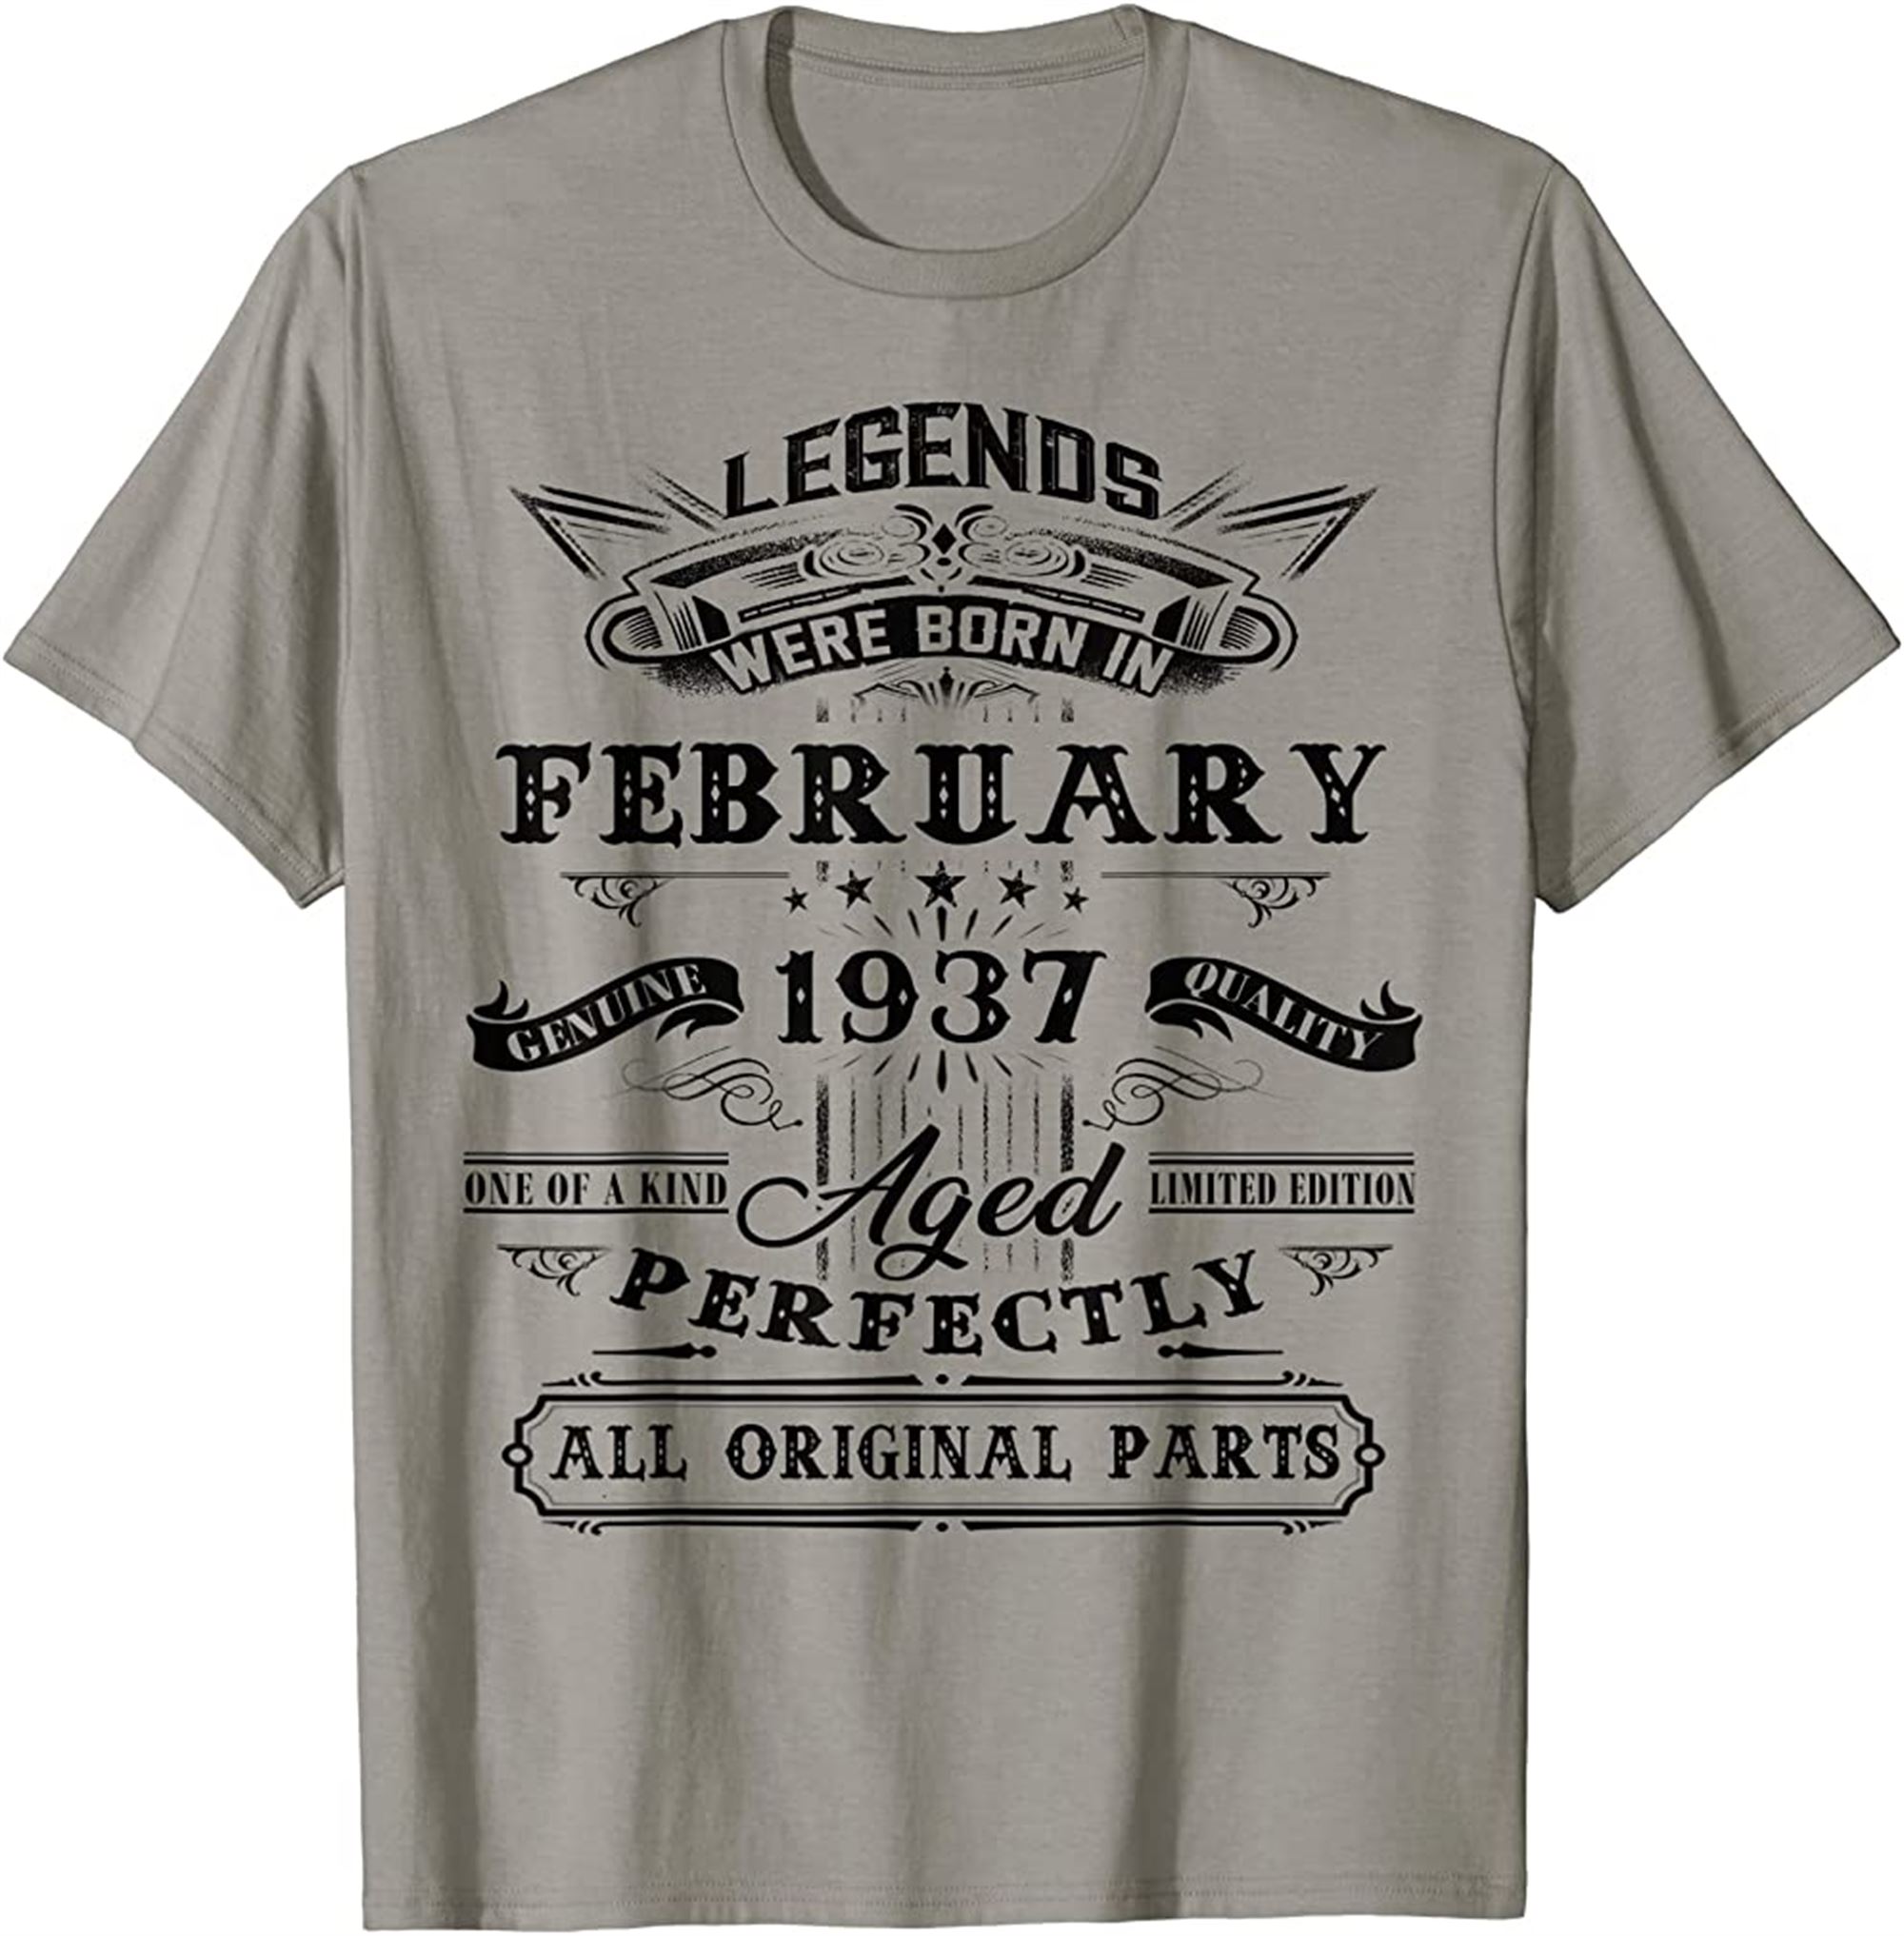 85th Birthday Gift For Legends Born February 1937 85 Yrs Old T-shirt Full Size Up To 5xl